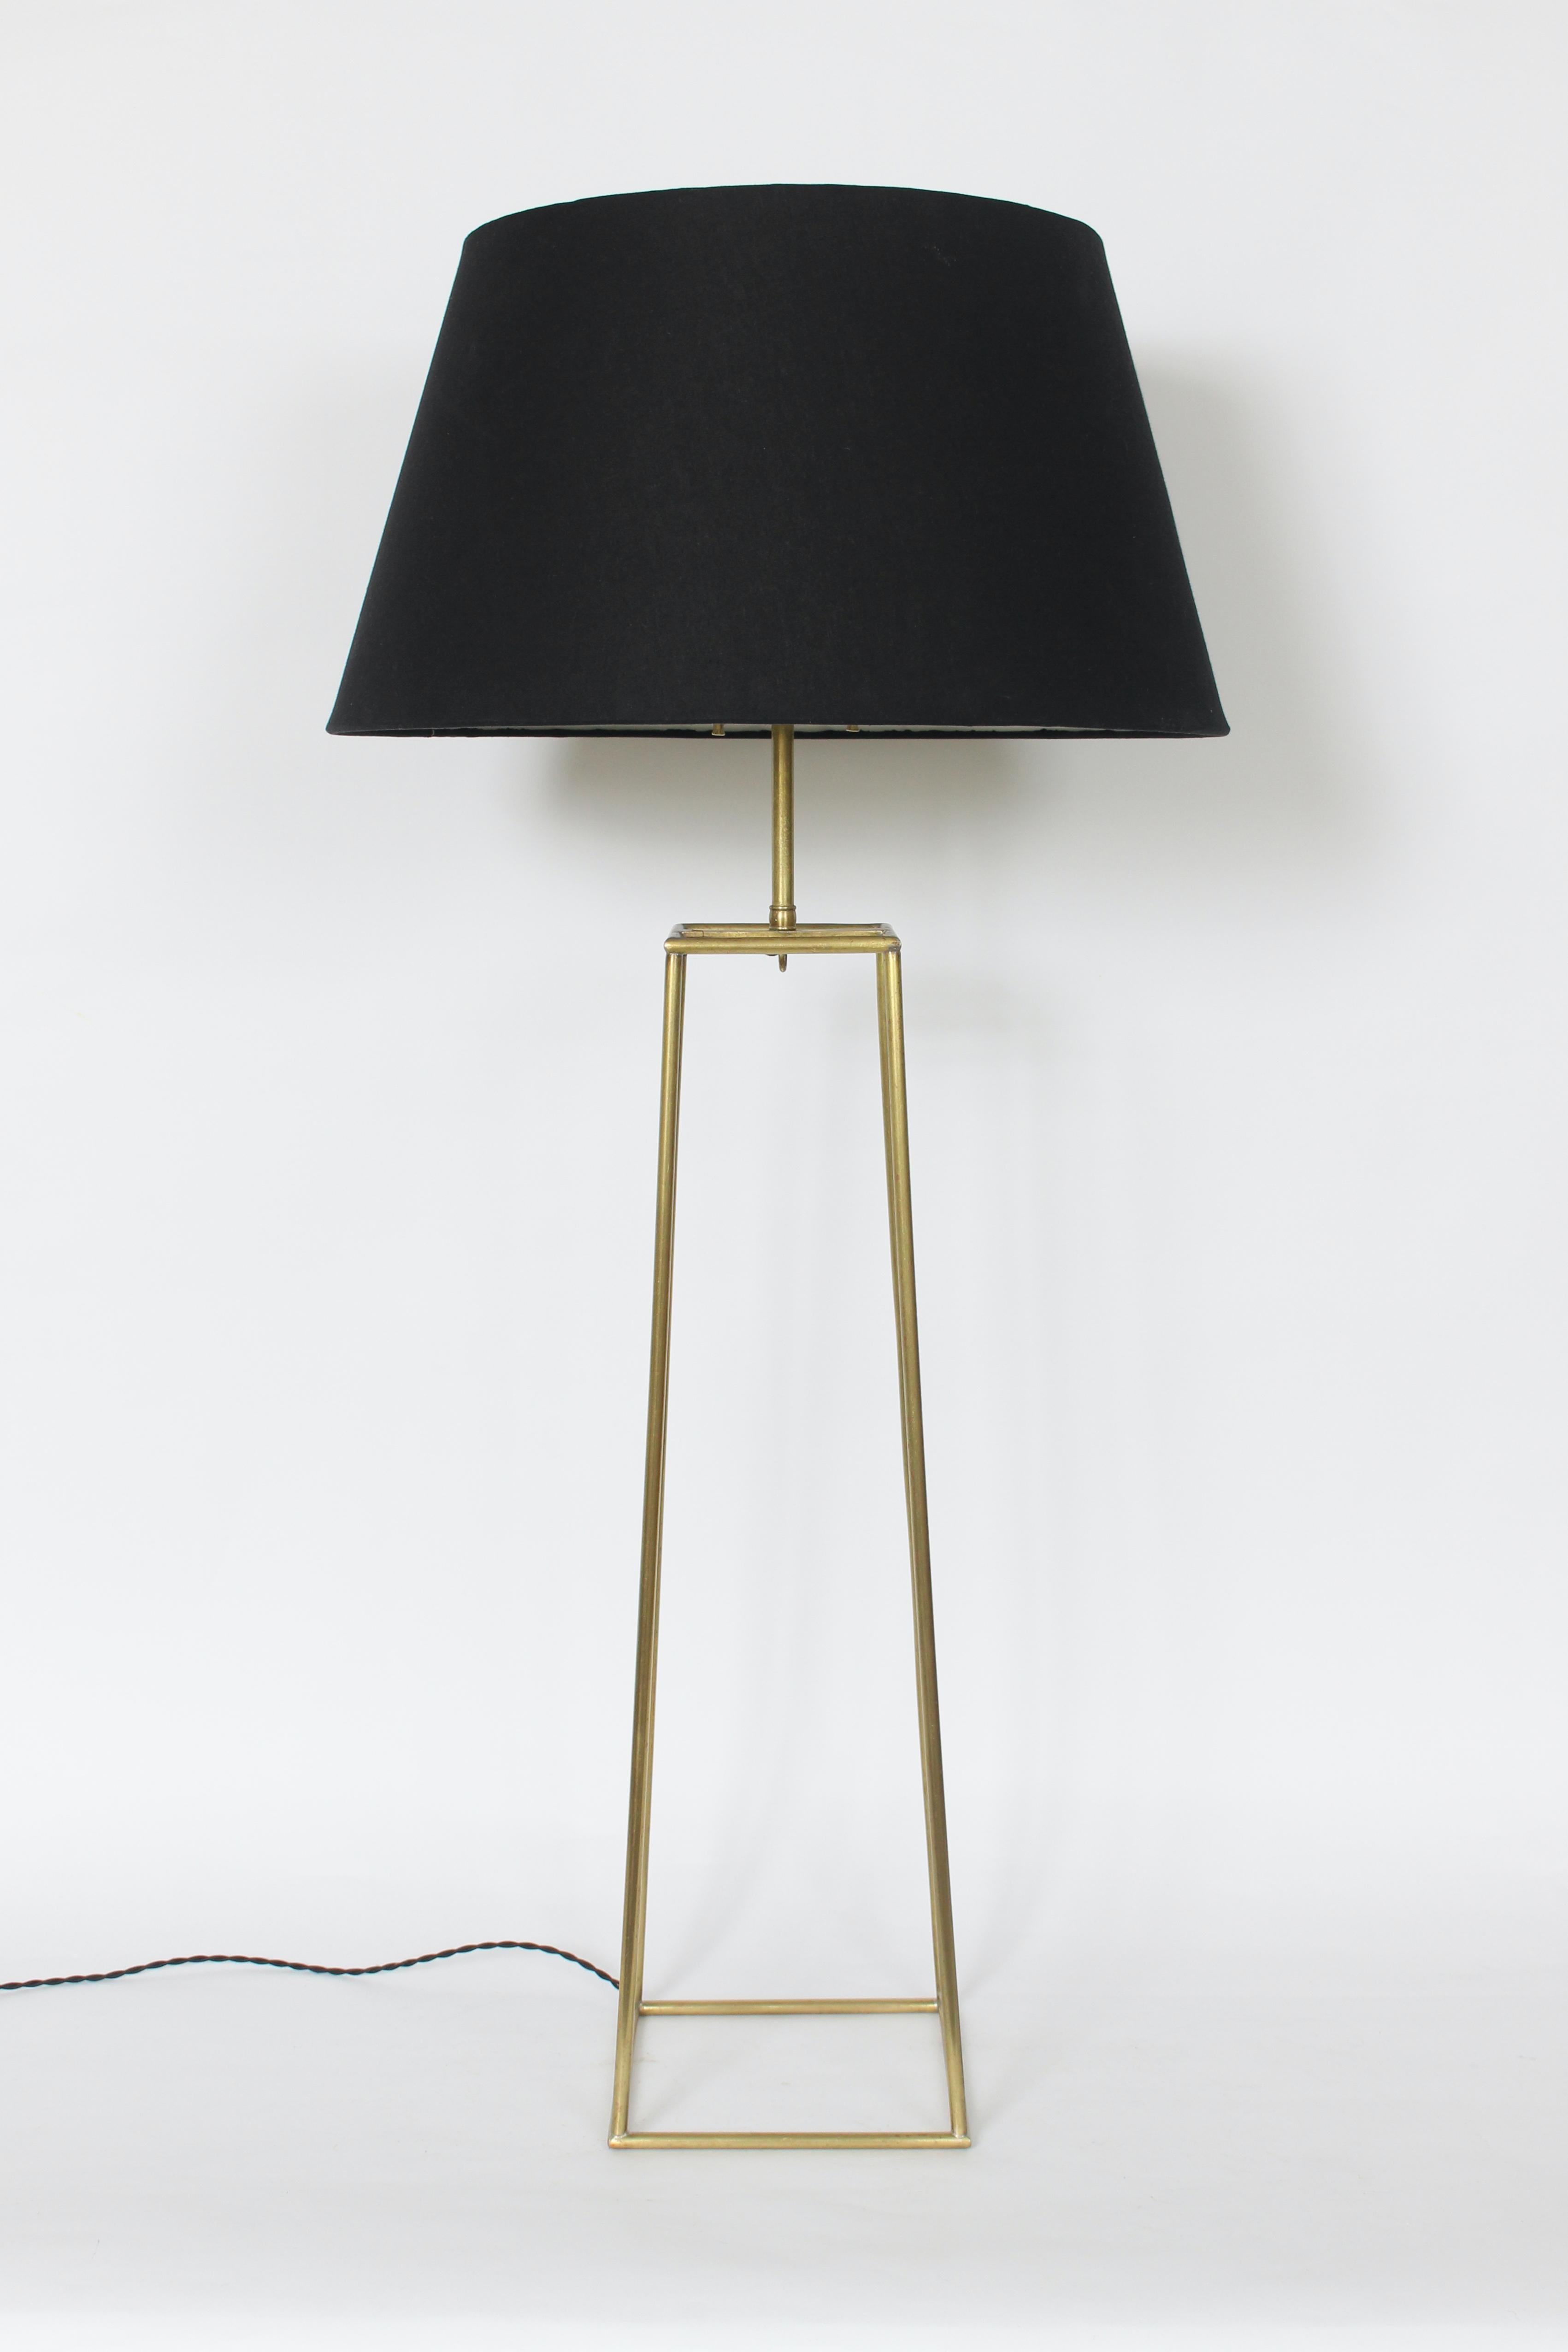 Hollywood Regency Substantial Tommi Parzinger Style Brass Open Box Form Table Lamp, 1950s For Sale